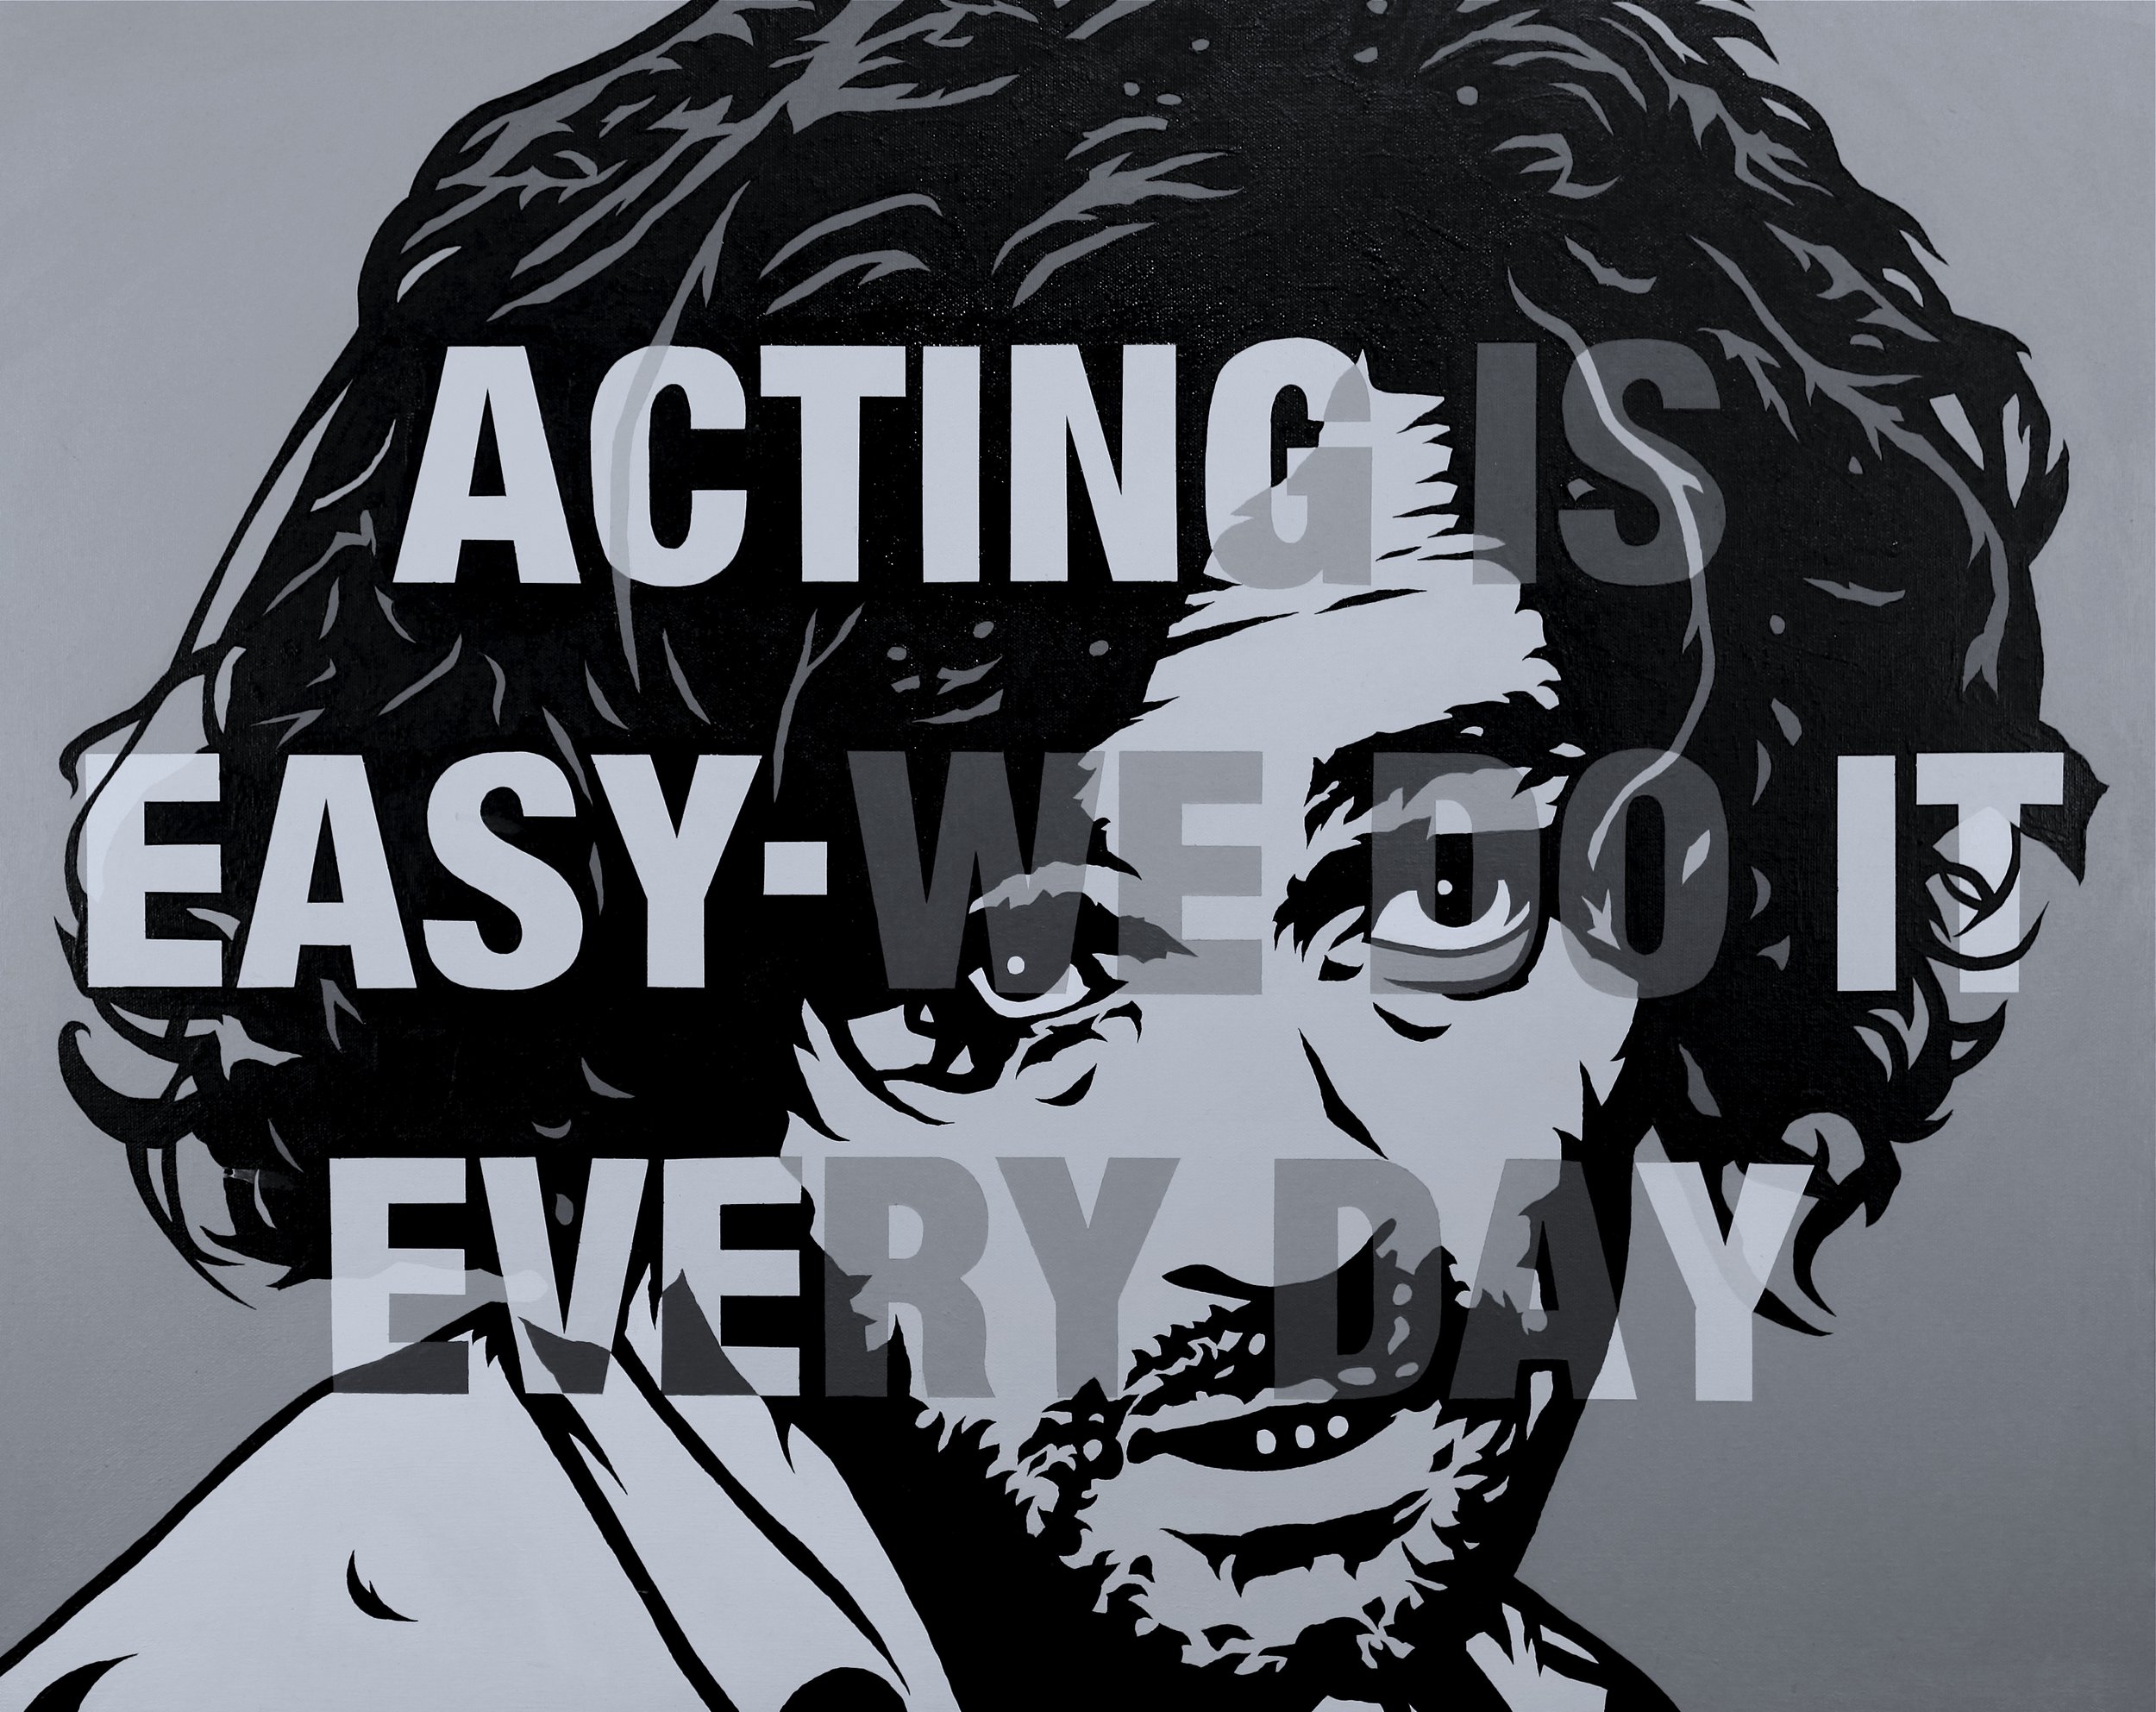 "Acting is easy, we do it every day" Acrylic on canvas.